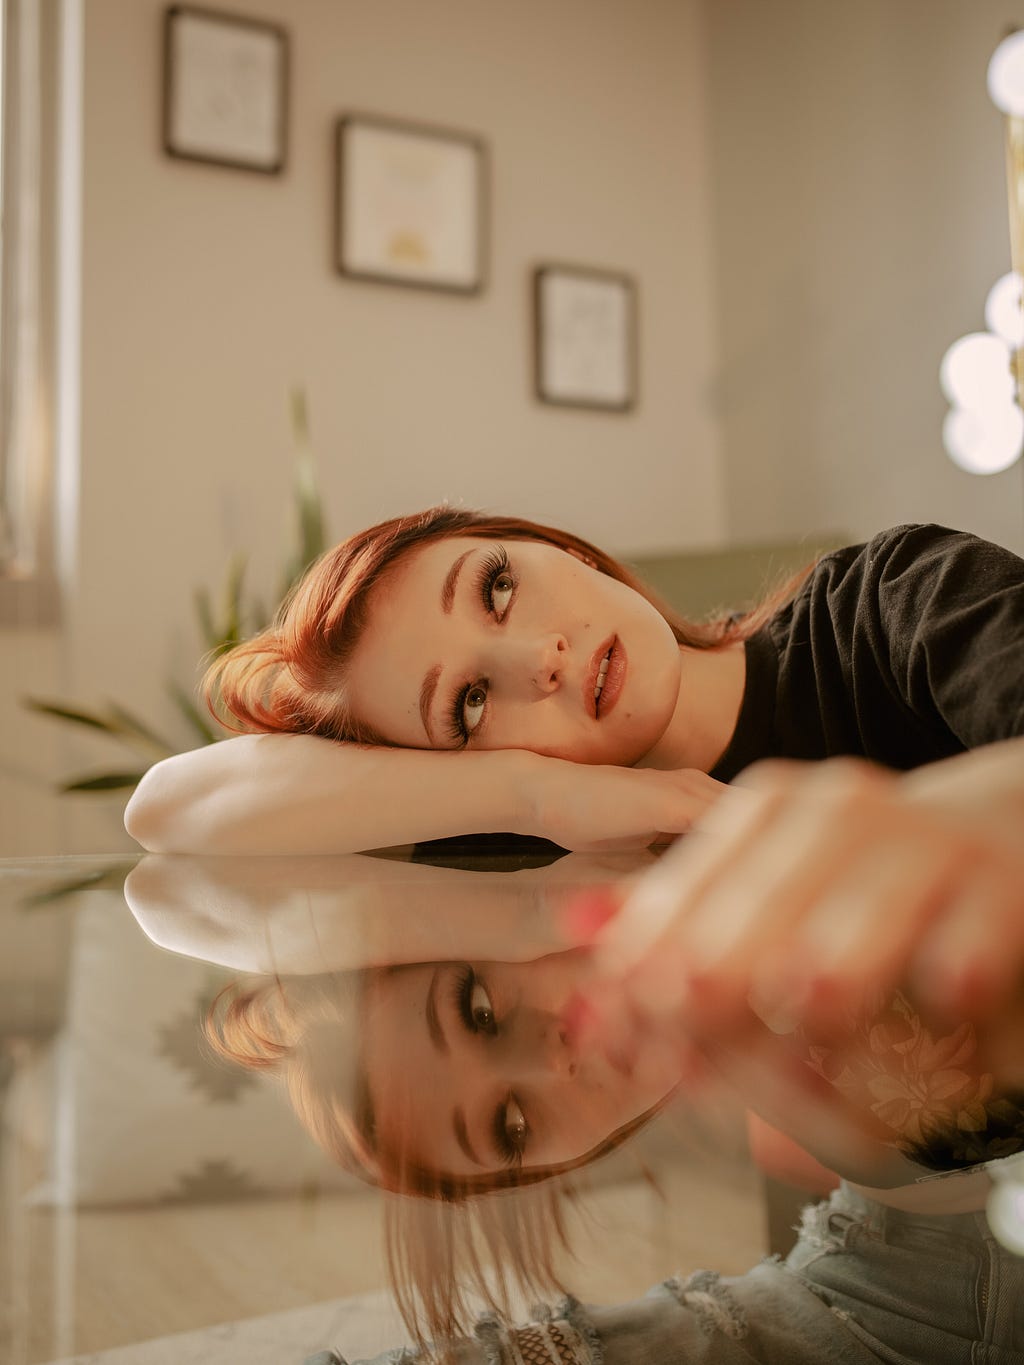 A red headed woman laying her head down on her arm on a glass table top reflecting upon something, as her image reflects back on herself.